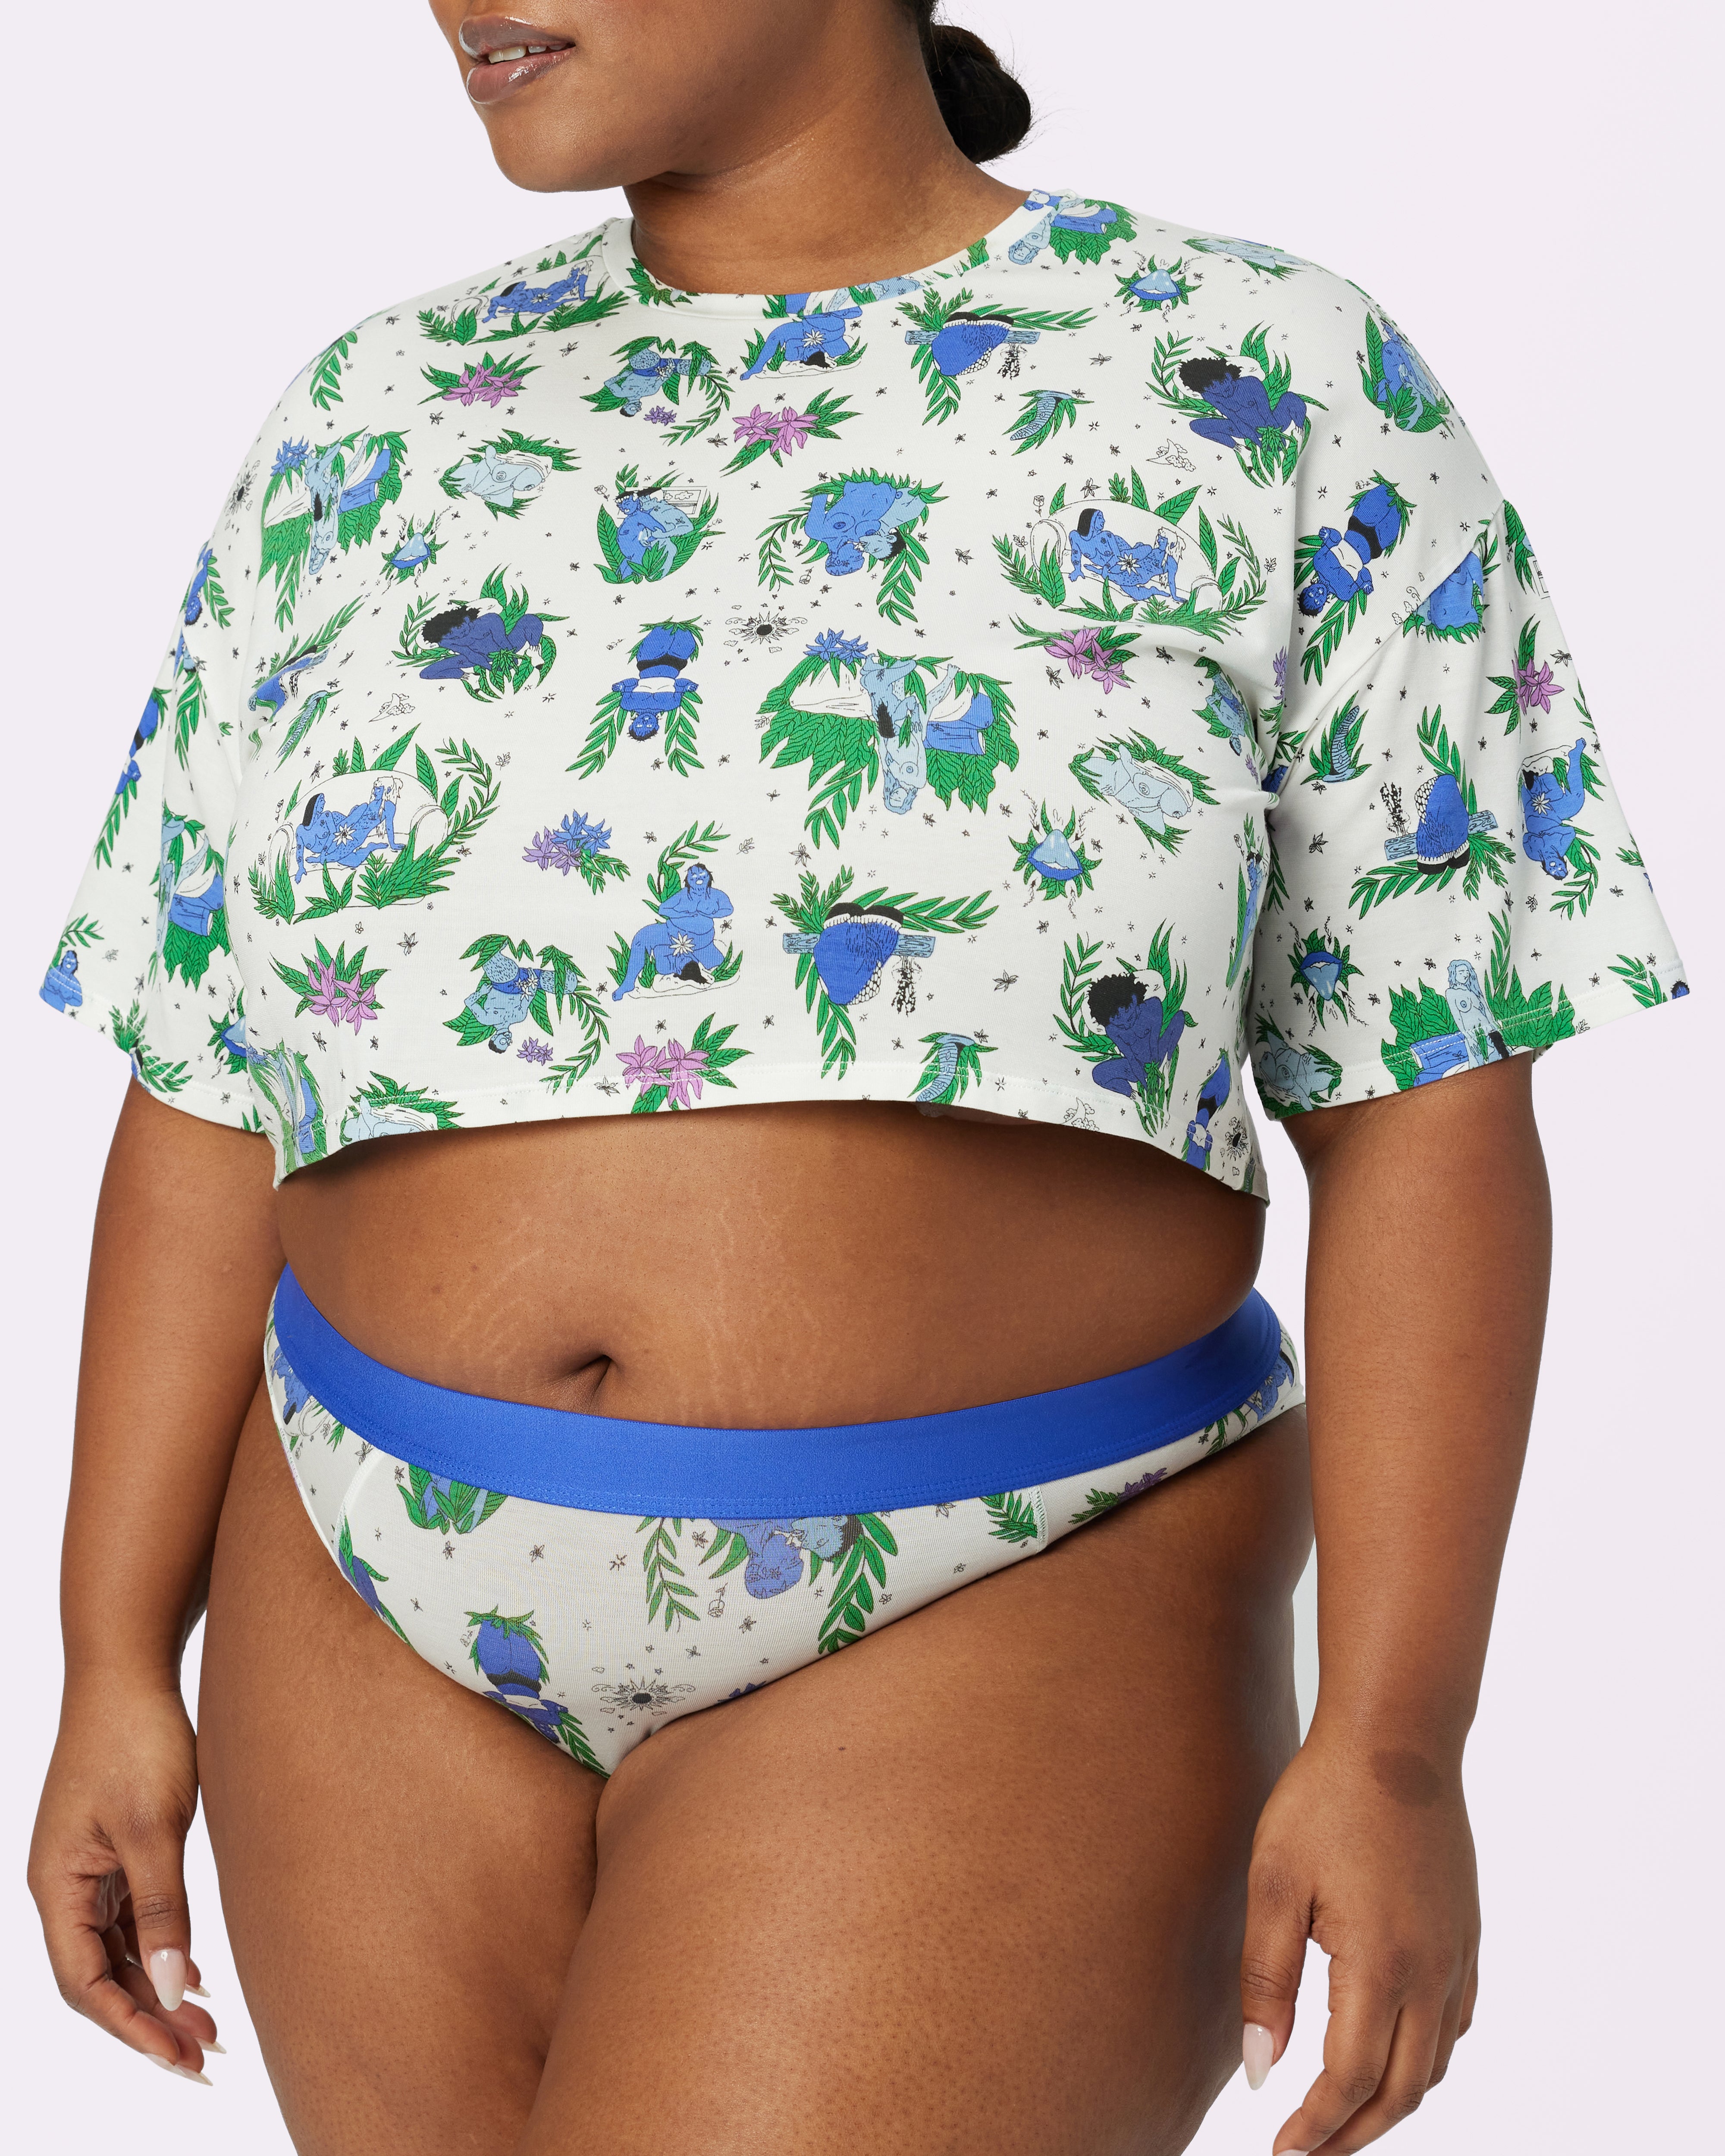 melt the lady cropped bumpy tops